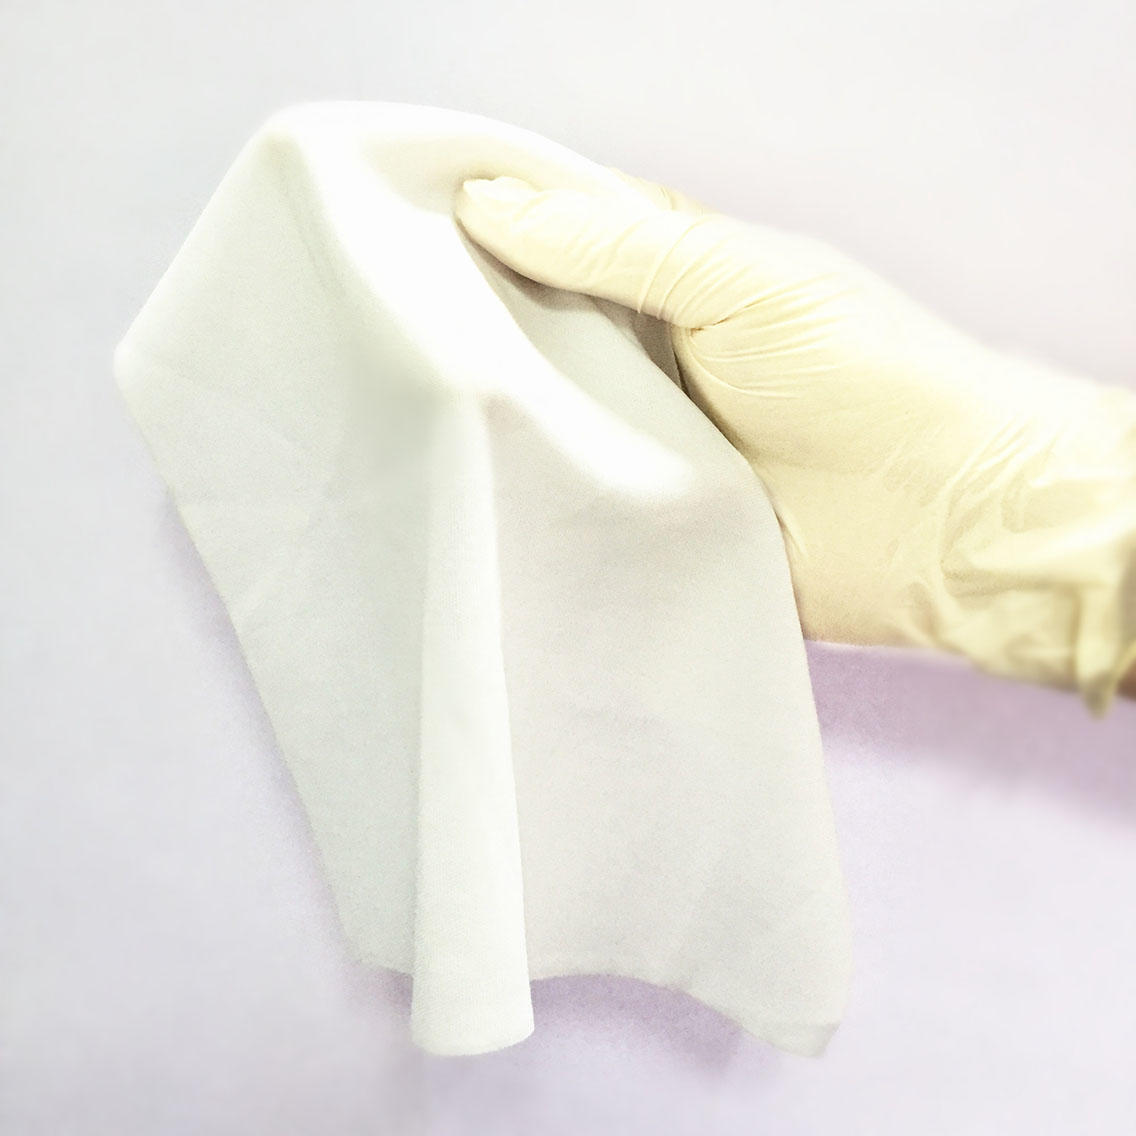 Cleanmo durable Industry cleaning wipes cutting edge for medical device products